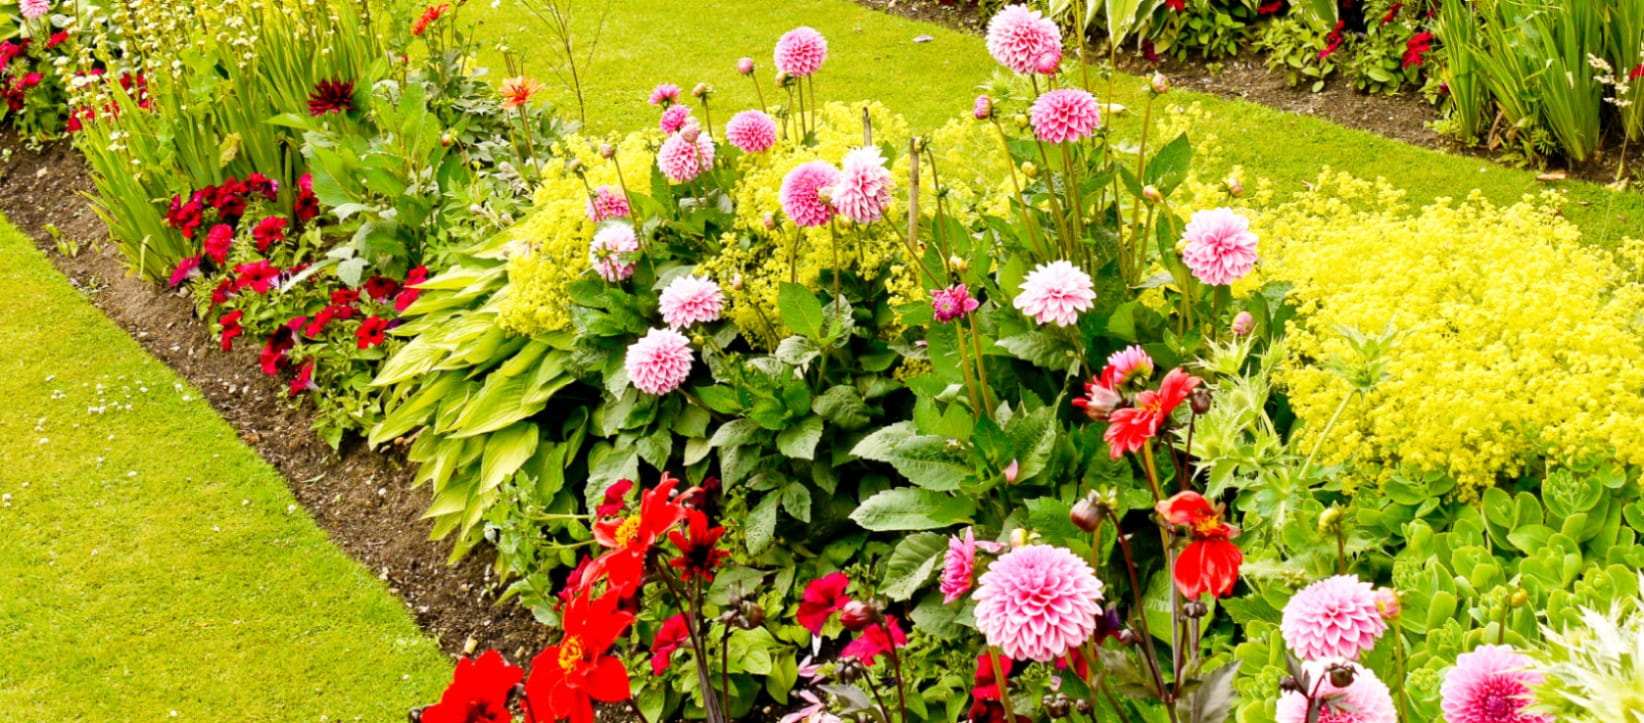 Dahlias in the foreground of a floral herbaceous border | Getty/DonaldMorgan